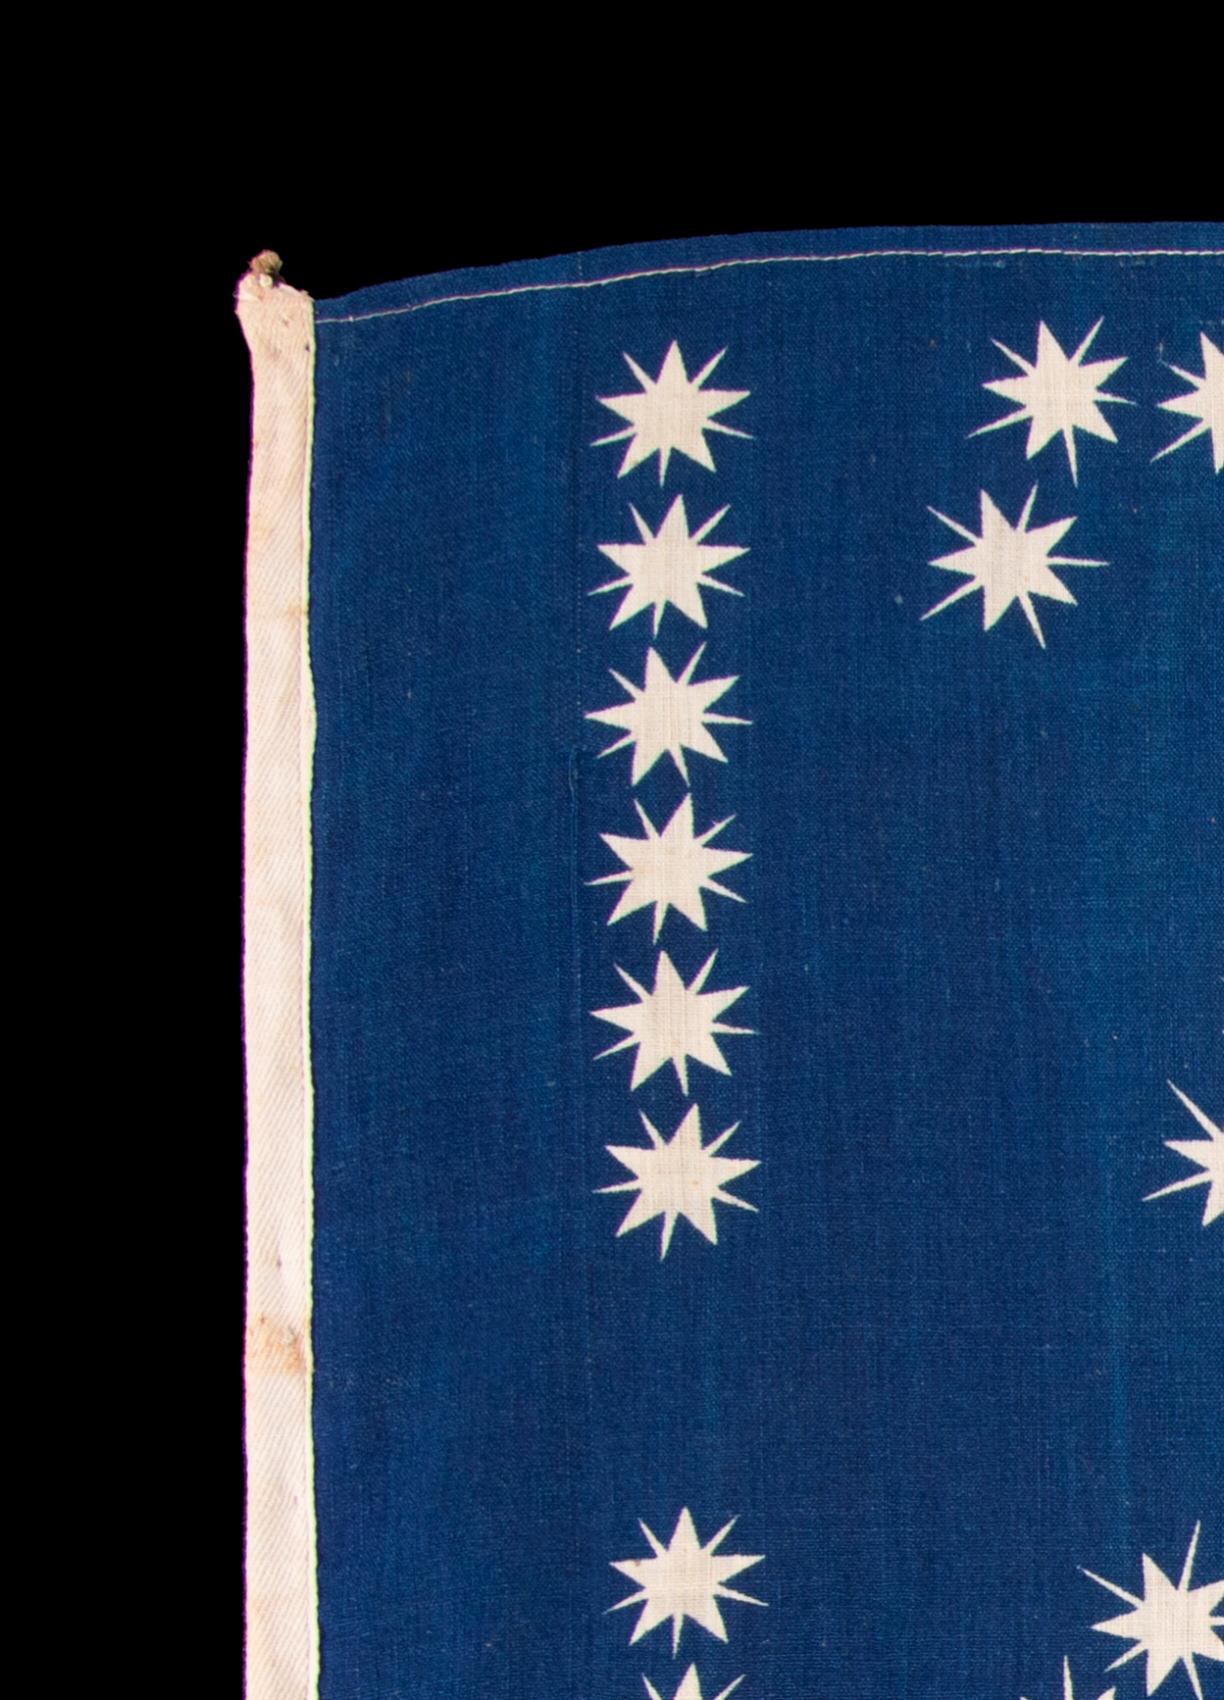 Late 19th Century Antique American Flag with Stars that Spell 